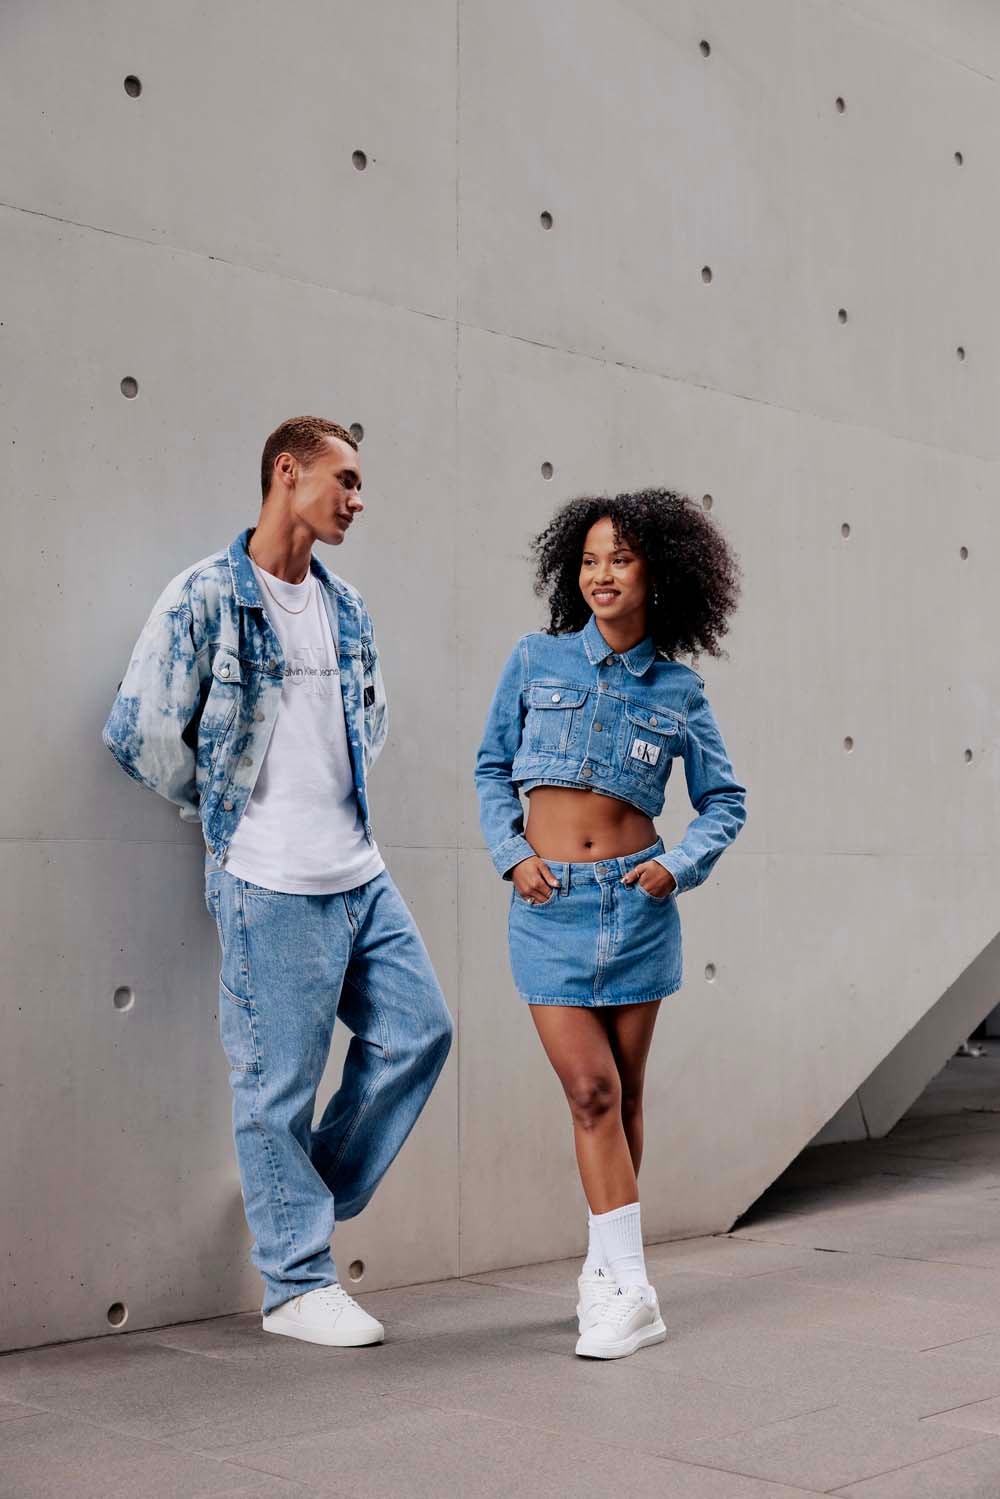 Calvin Klein launches Fall 2023 Jeans campaign starring Bright